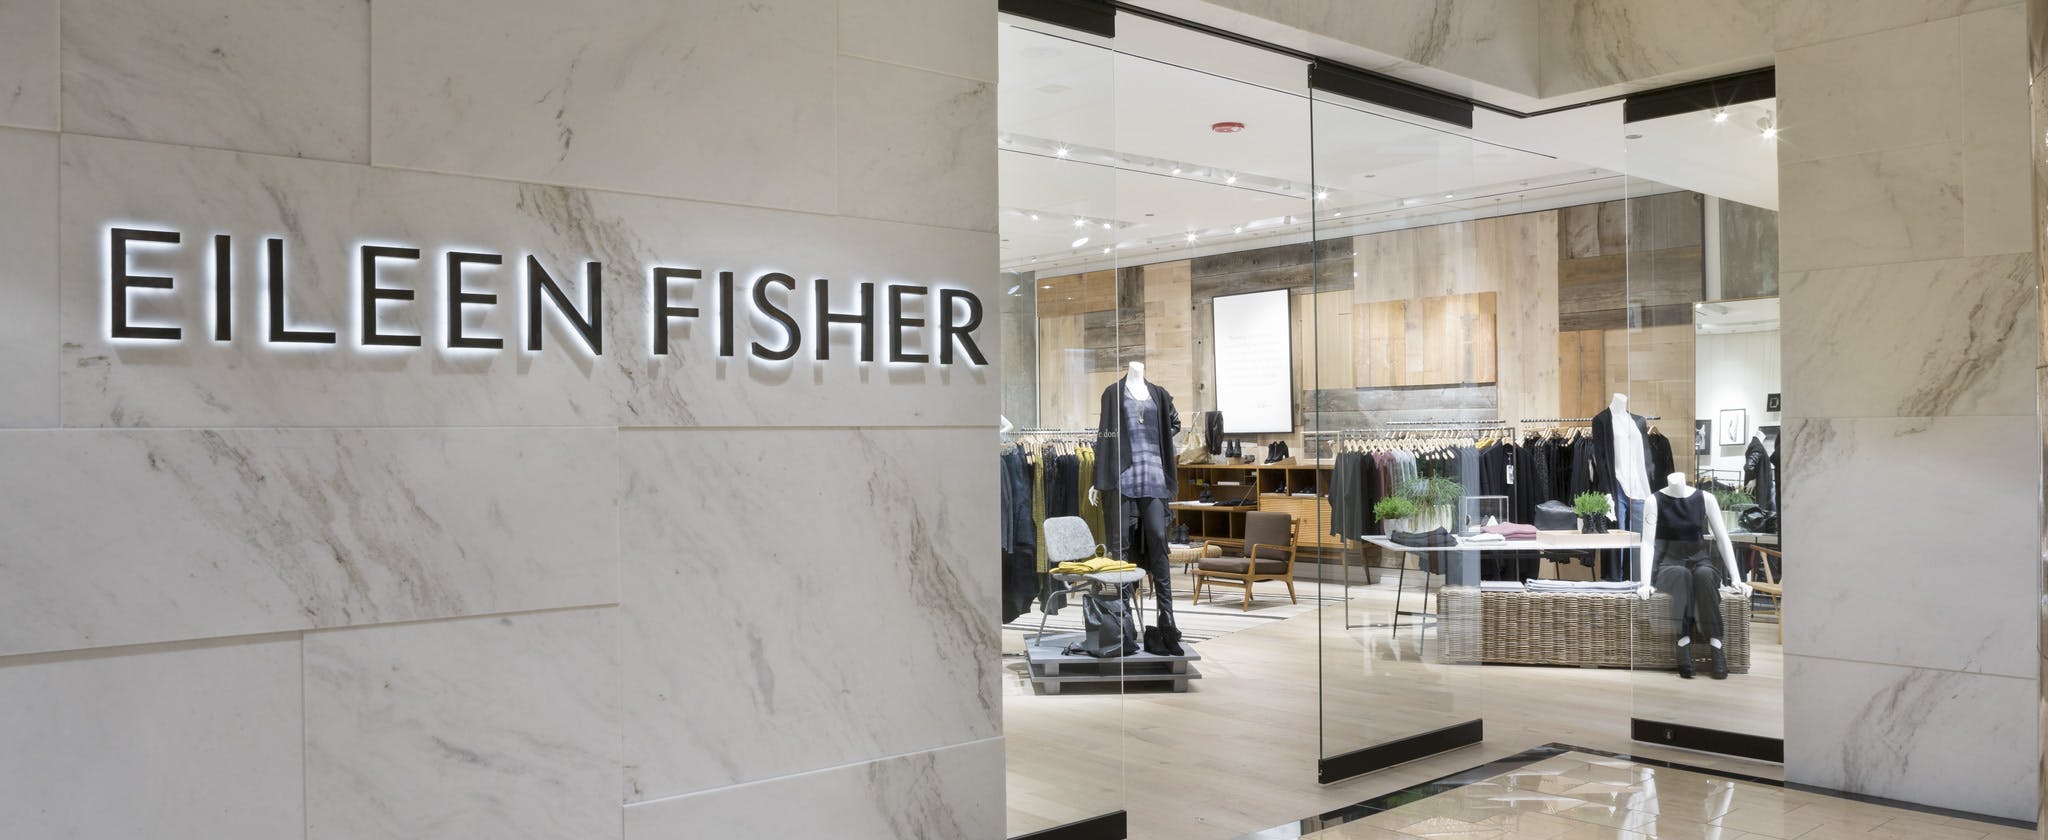 interior commercial glass systems used as retail storefront at Eileen Fisher in indoor mall